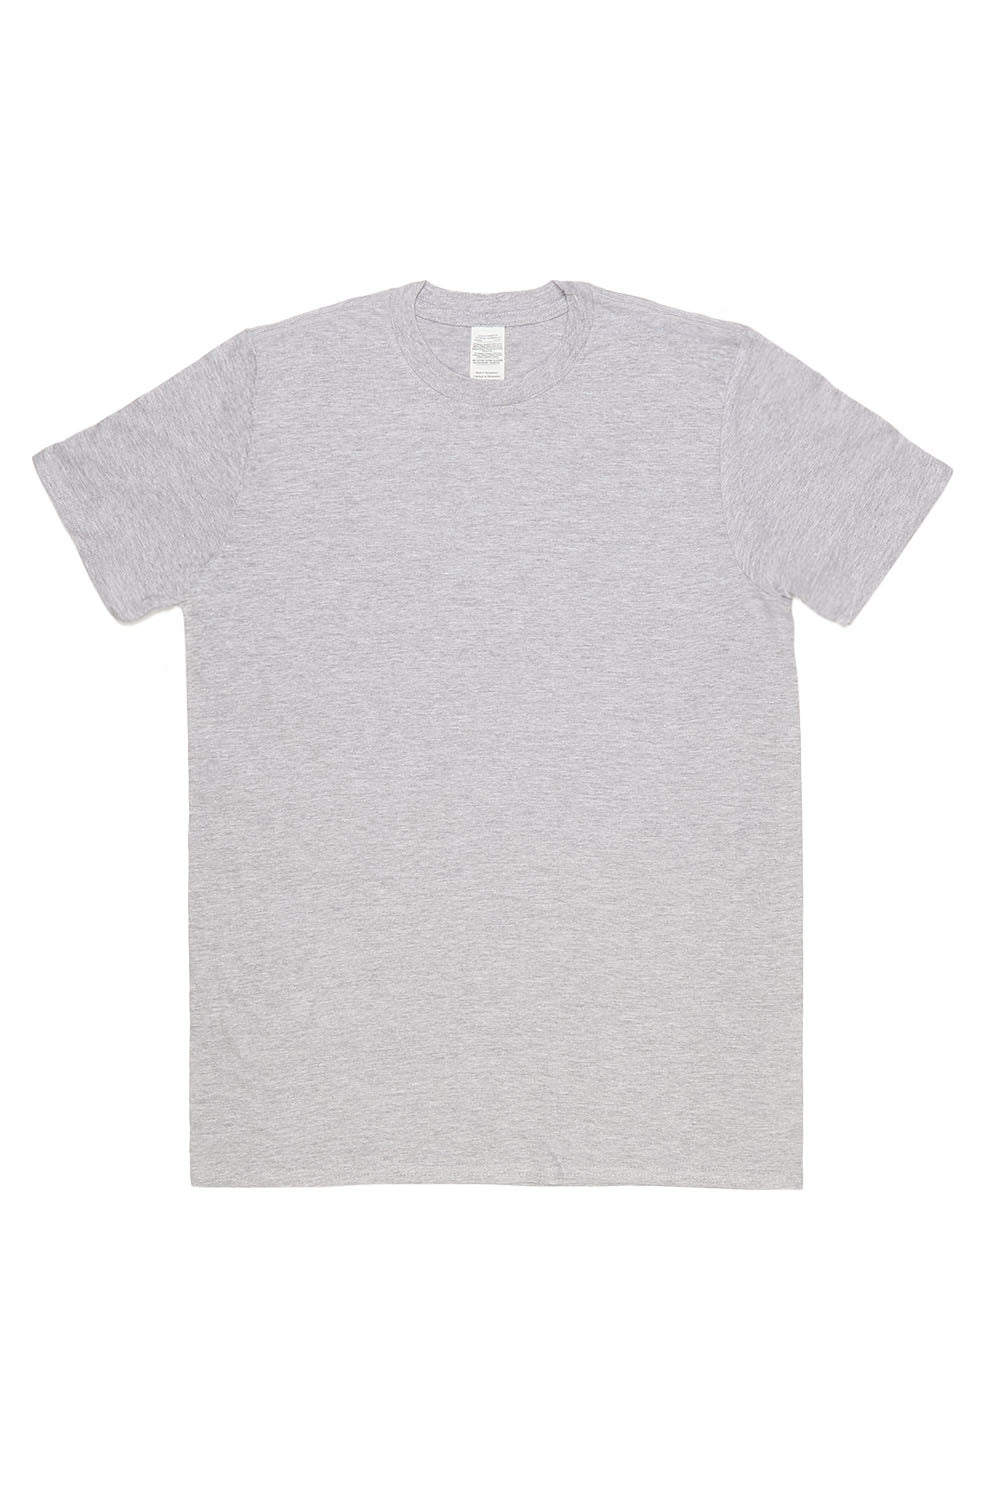 Softstyle Plain T-Shirt in Grey (Custom Pack)